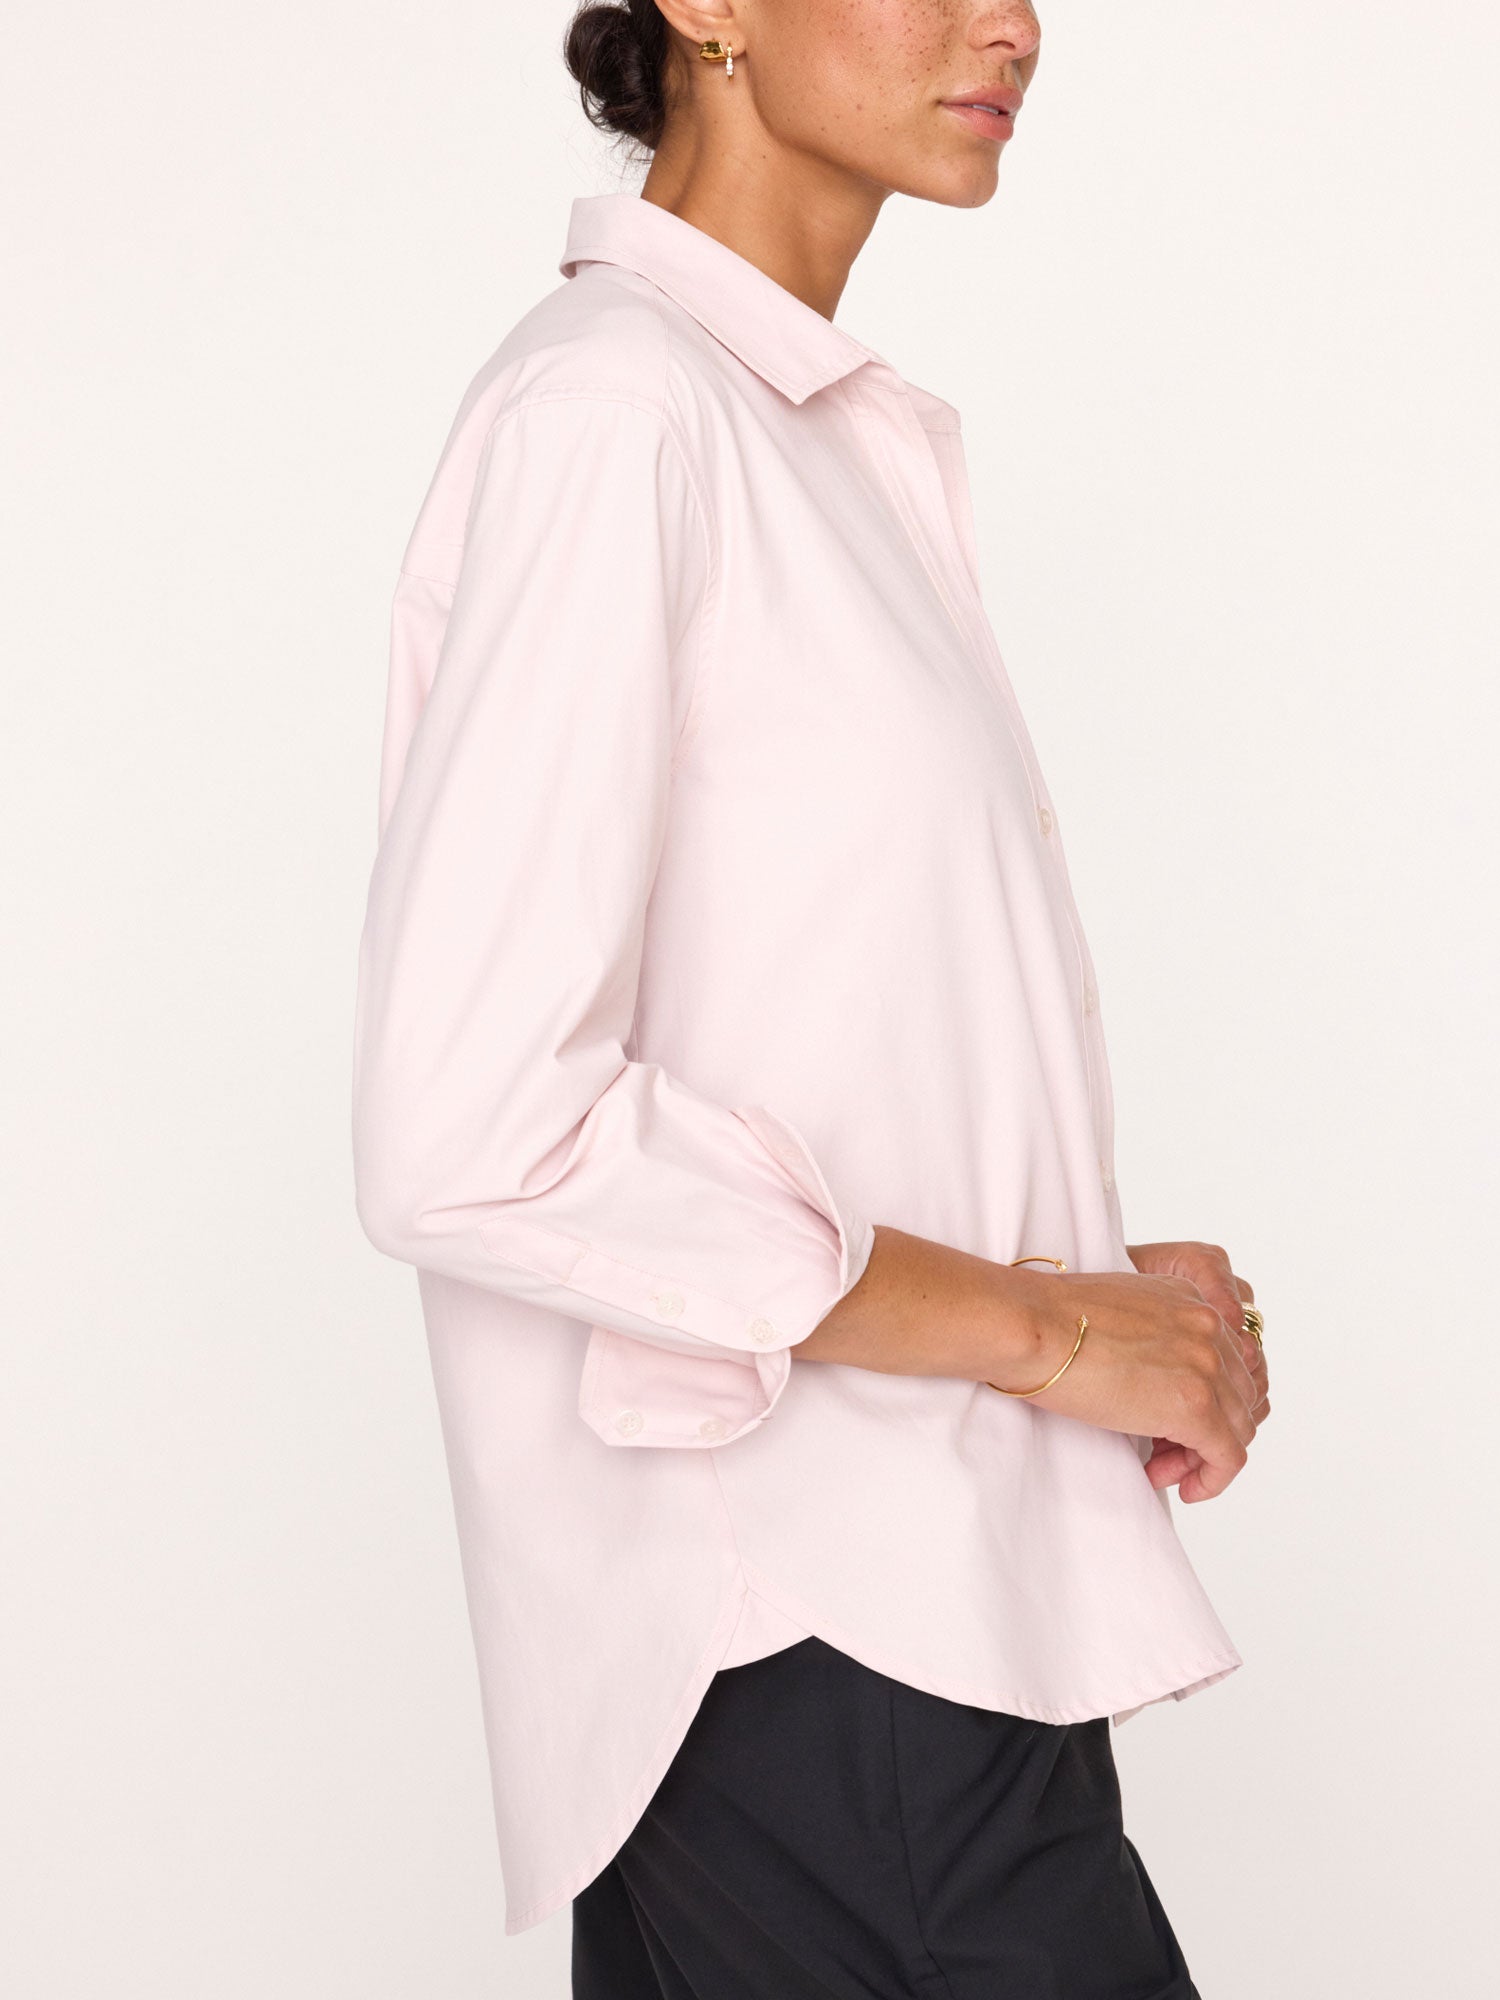 Everyday button up light pink shirt side view